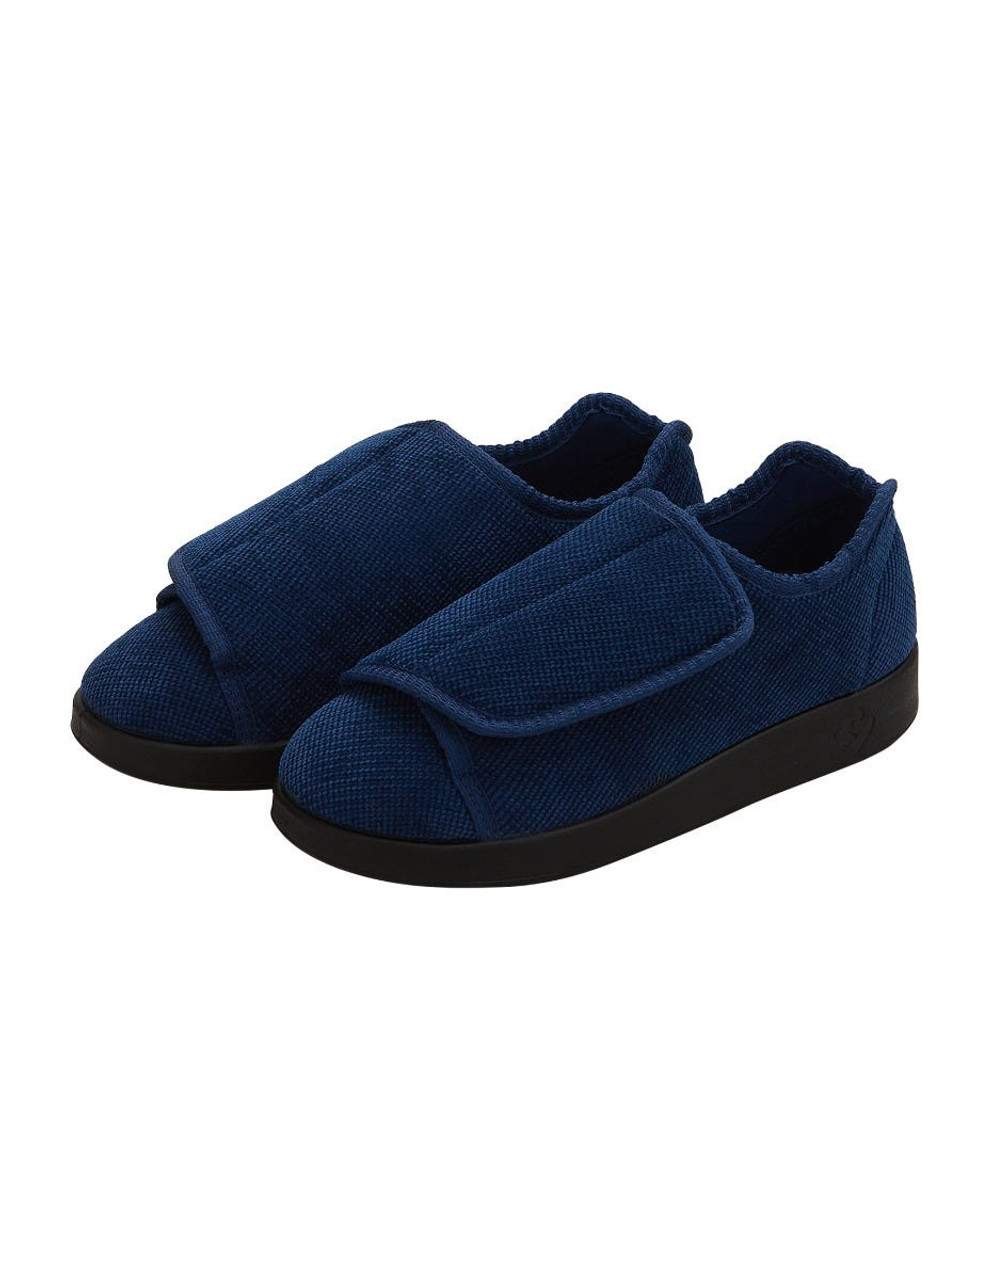 Silverts SV15100 Womens Extra Extra Wide Easy Closure Slippers Navy, Size=8, SV15100-SVNVB-8